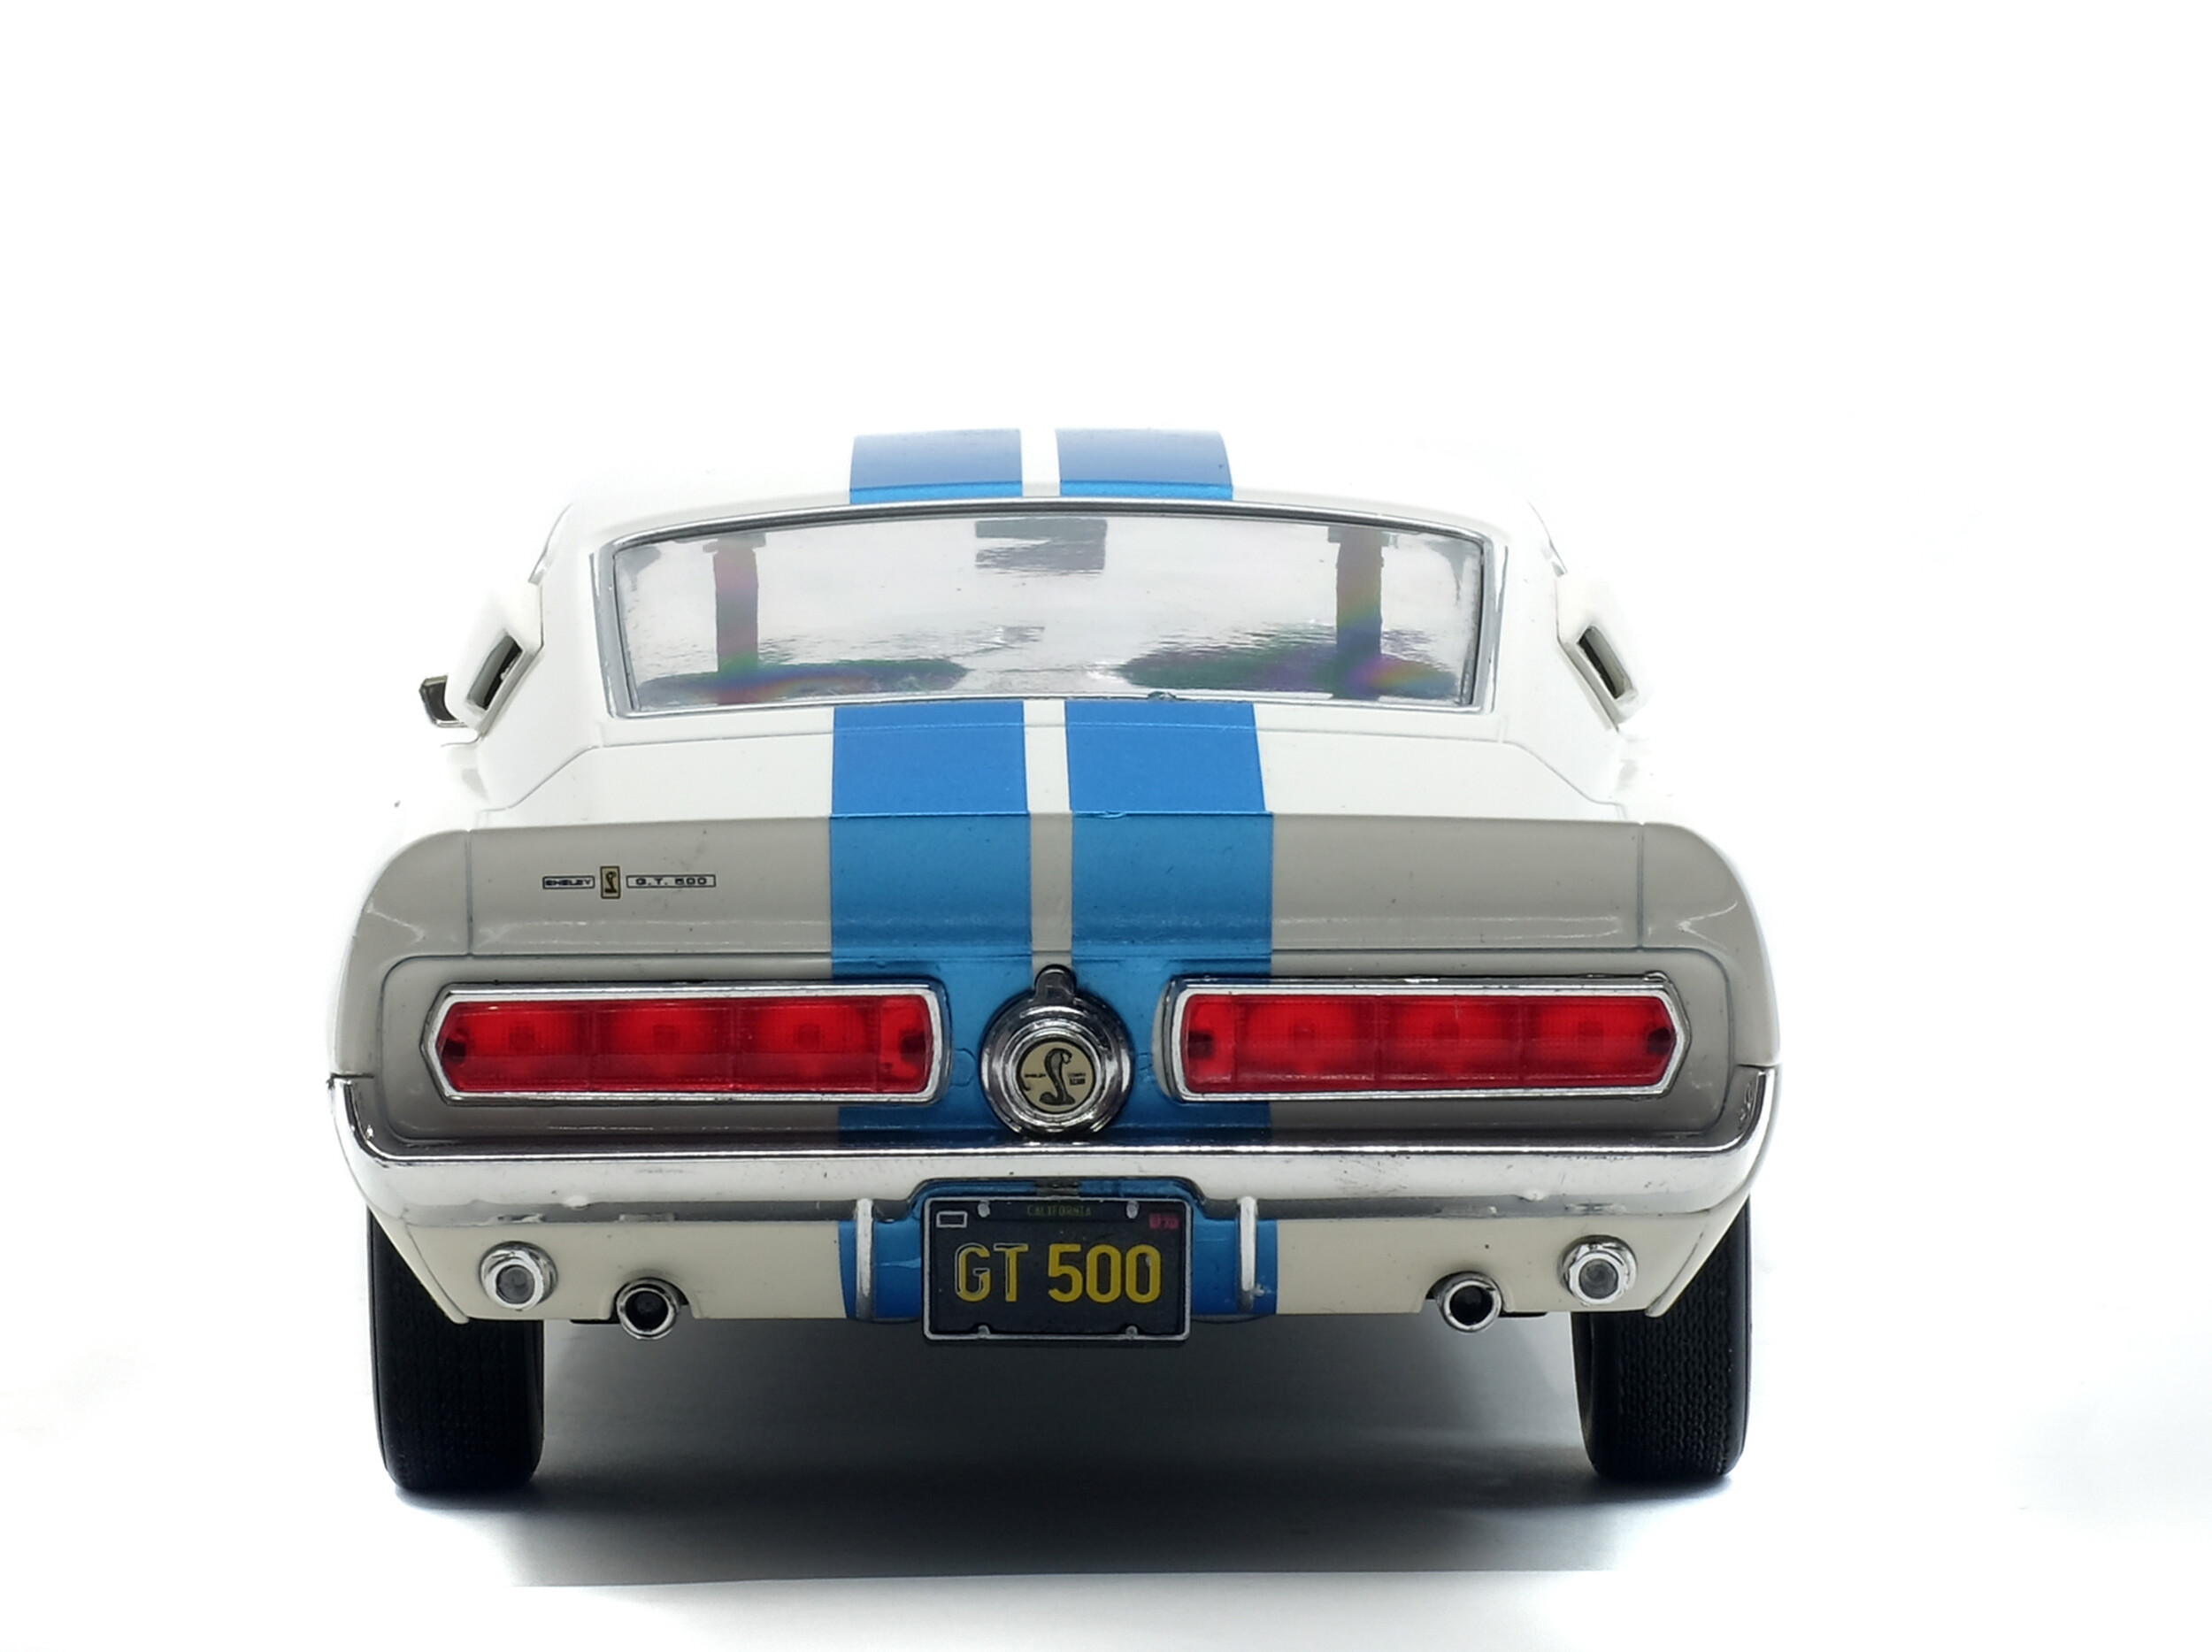 Ford Mustang Shelby GT 500 1967 blanche bandes bleues 12,5cm neuve